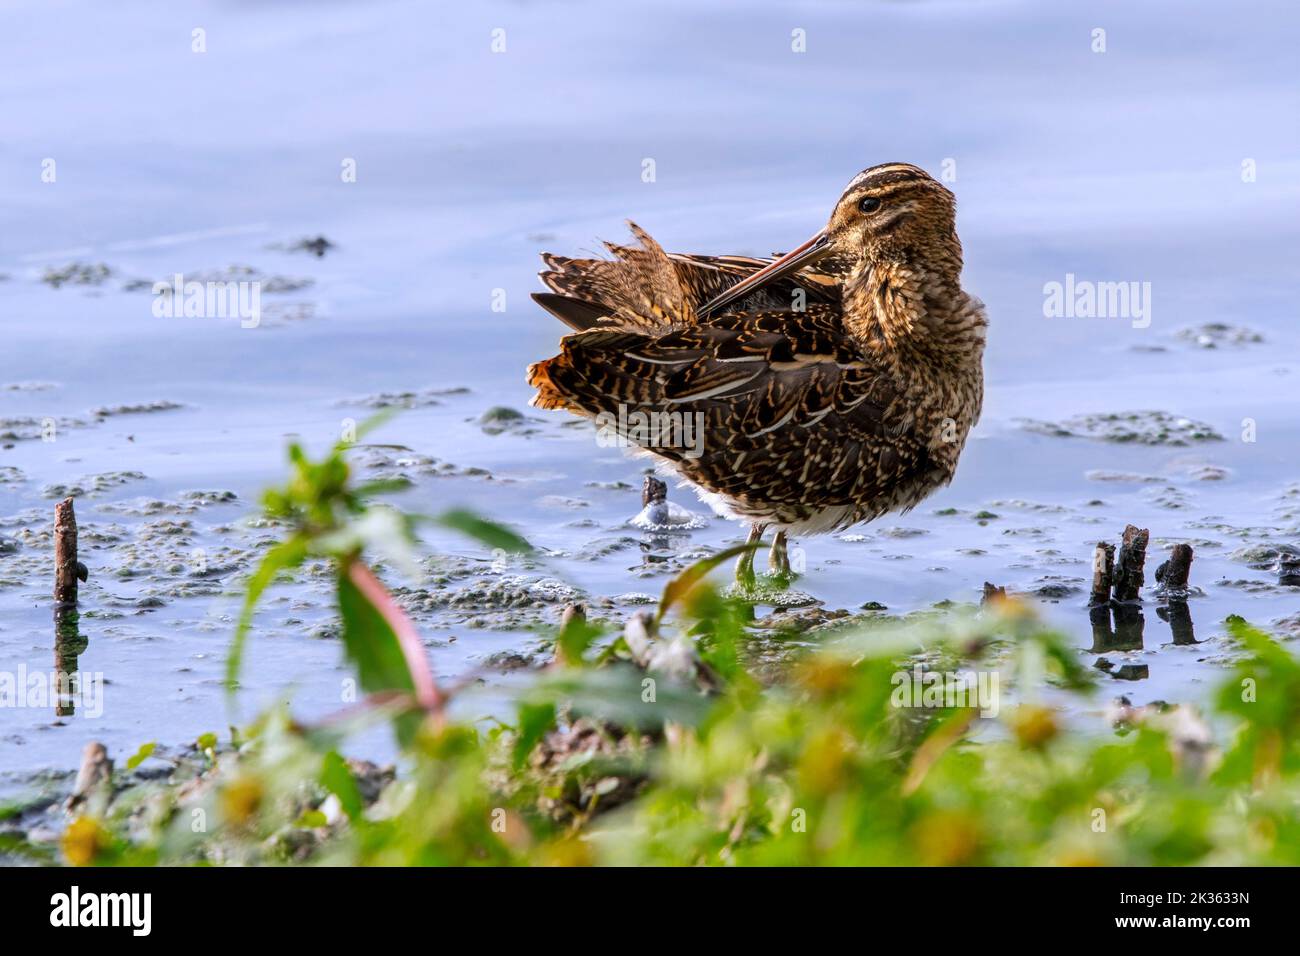 Common snipe (Gallinago gallinago) preening feathers in shallow water of lake / pond Stock Photo